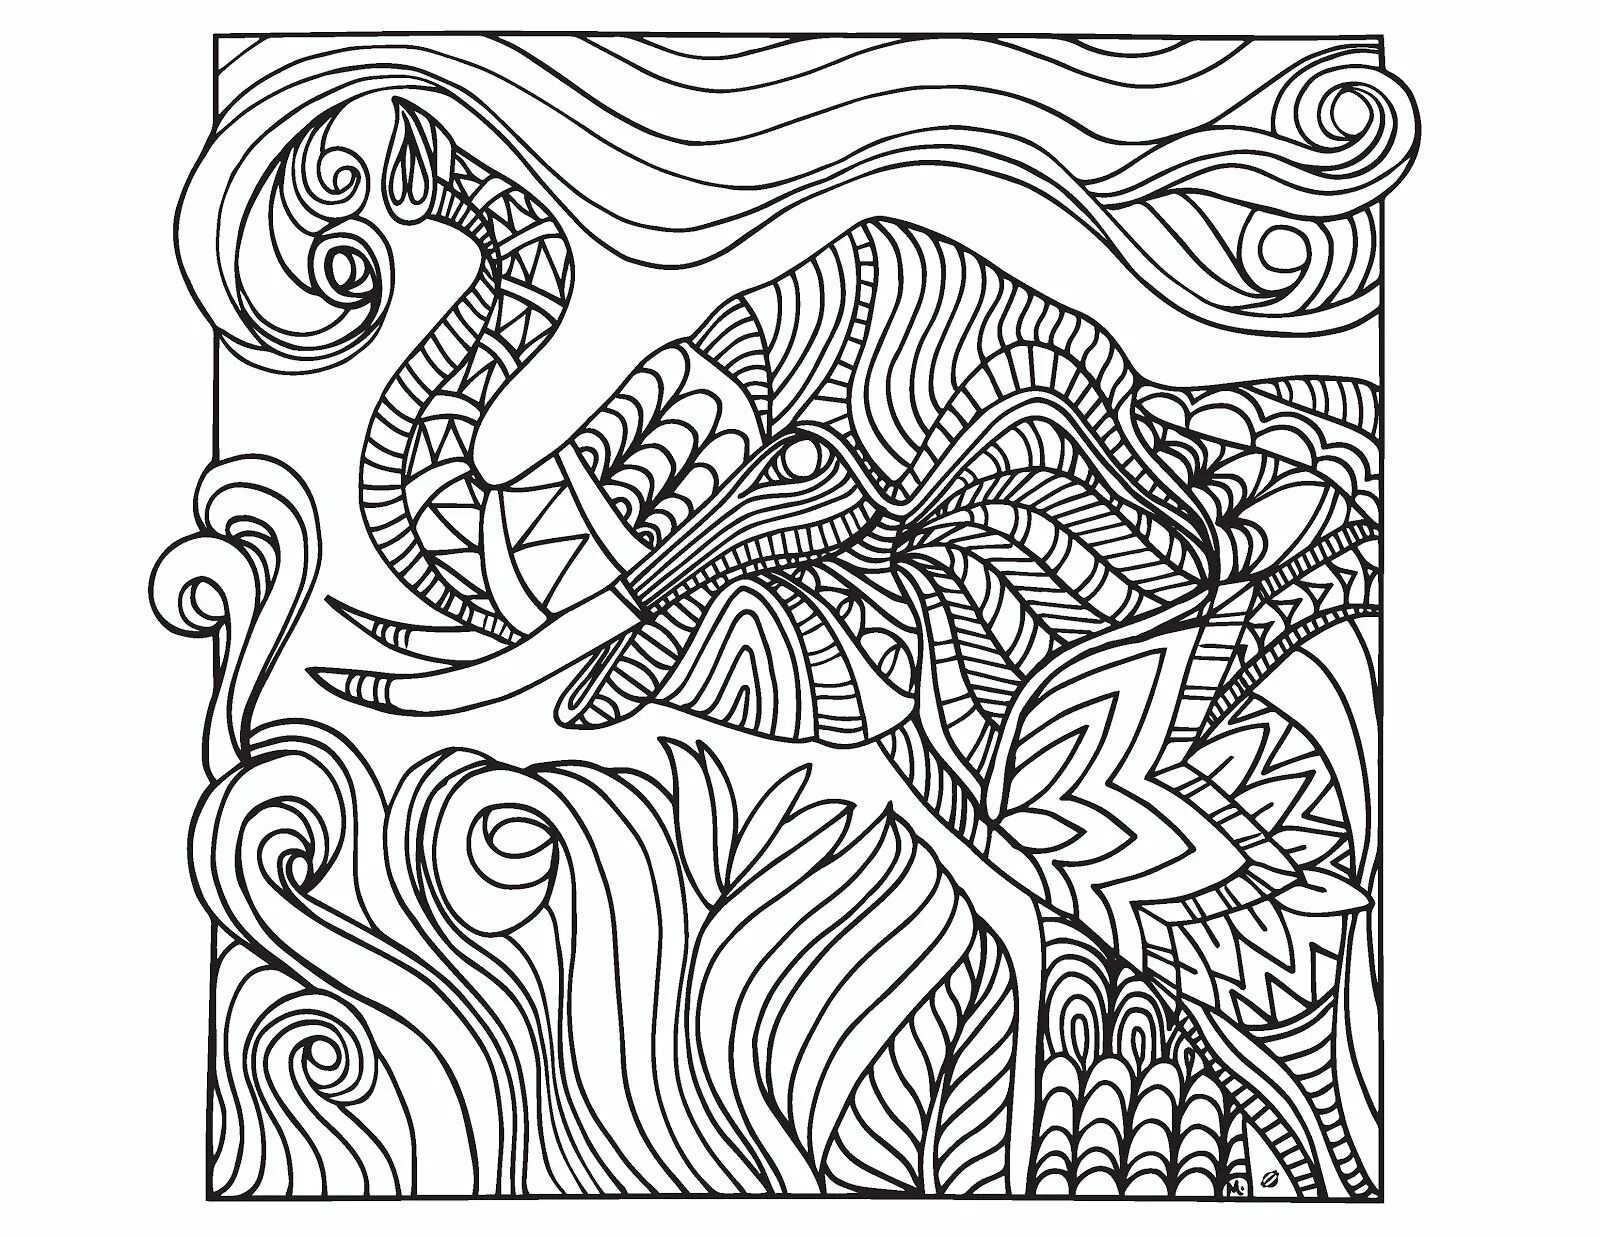 Charming relaxation coloring book